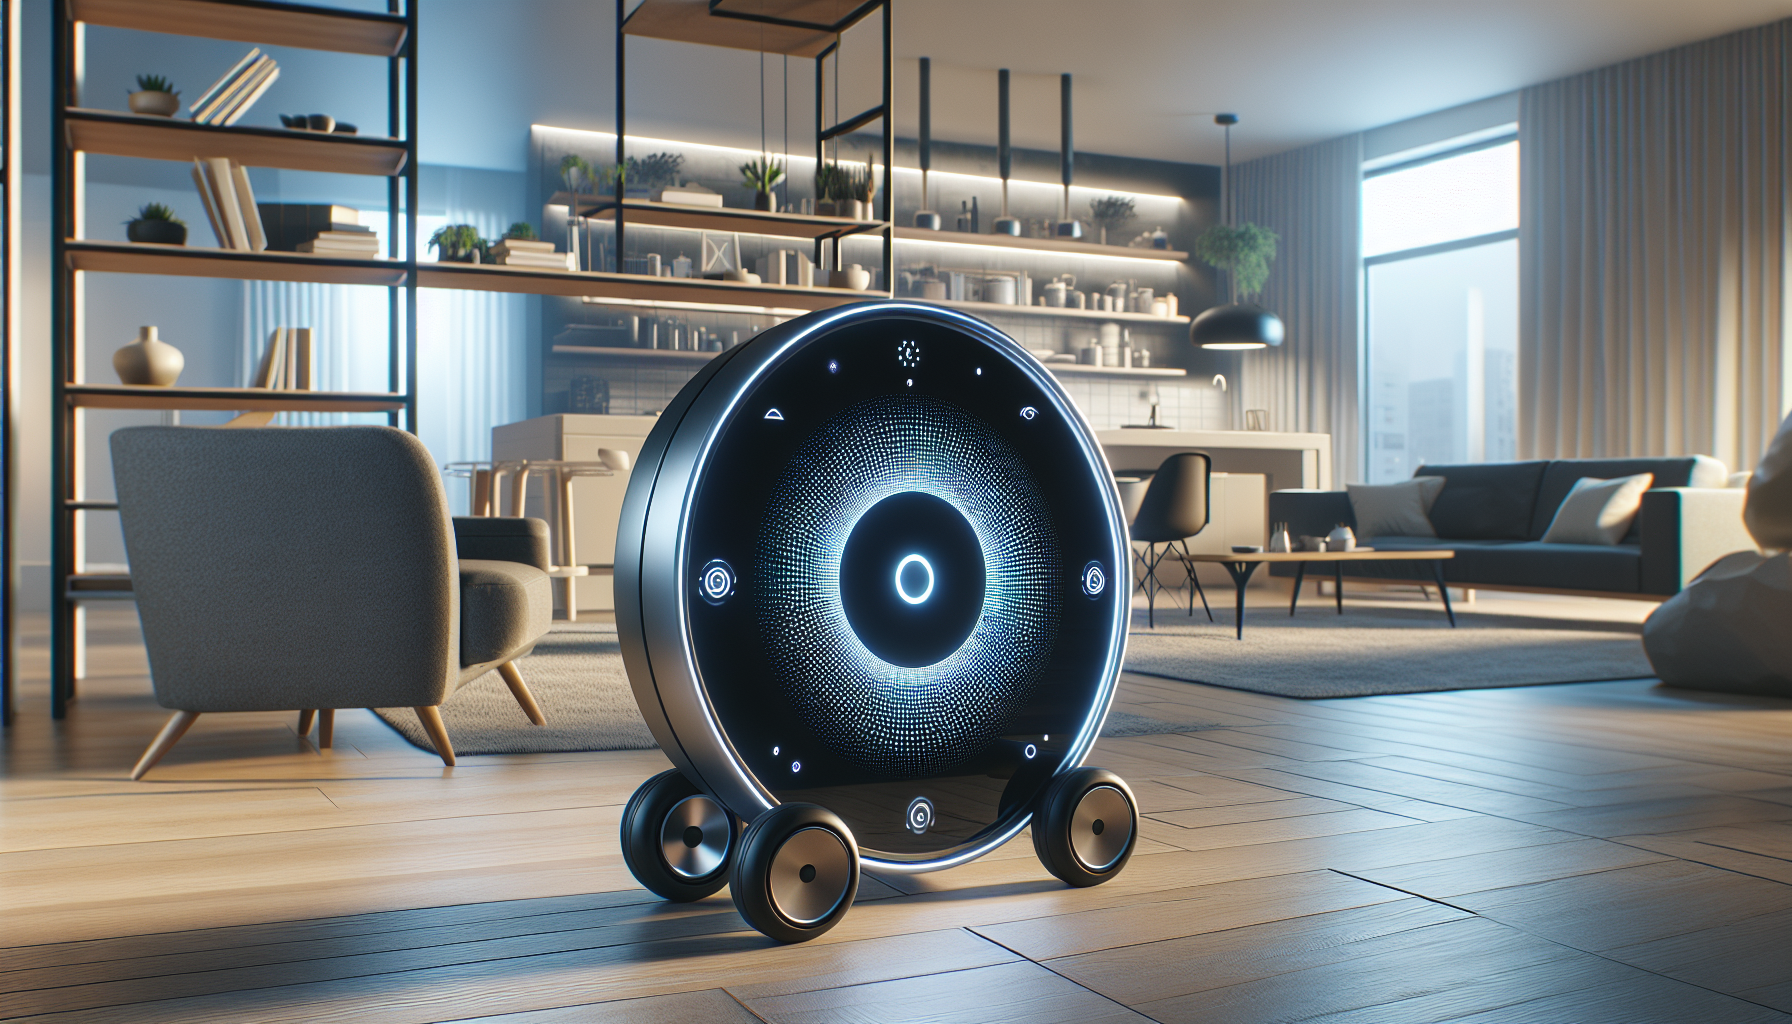 LG Unveils New Robotic Smart Home AI Assistant With 2 Wheels at CES 2024